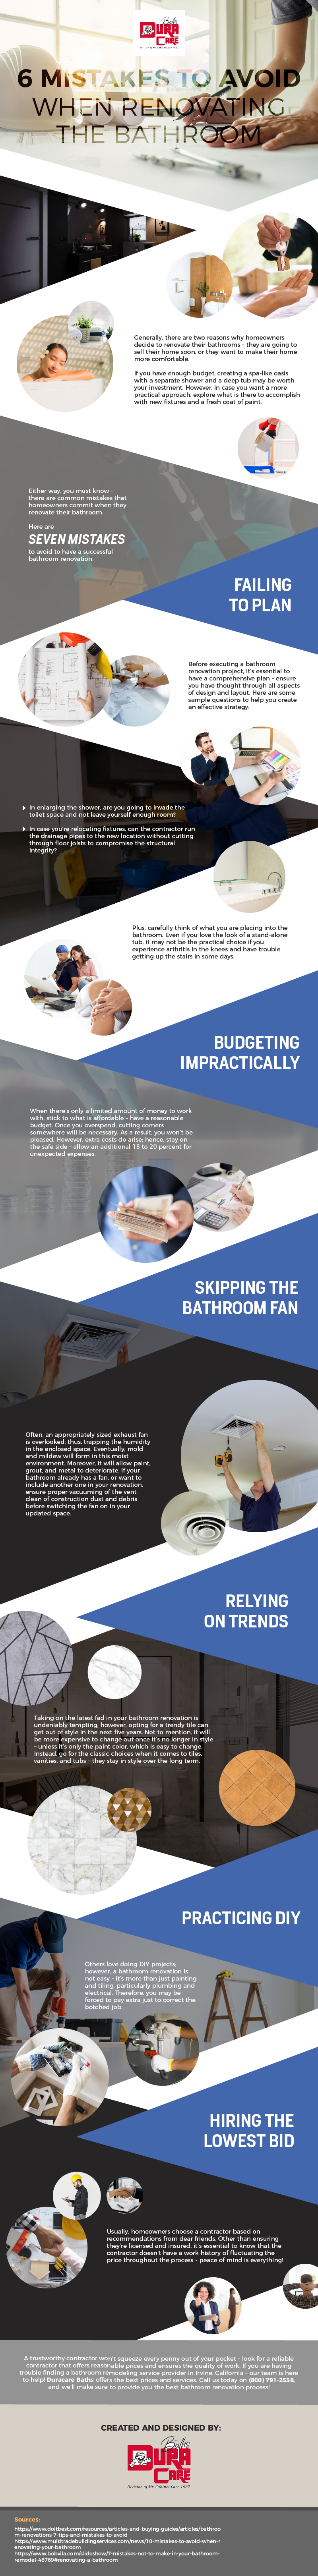 6 Mistakes to Avoid When Renovating the Bathroom-01 infographic